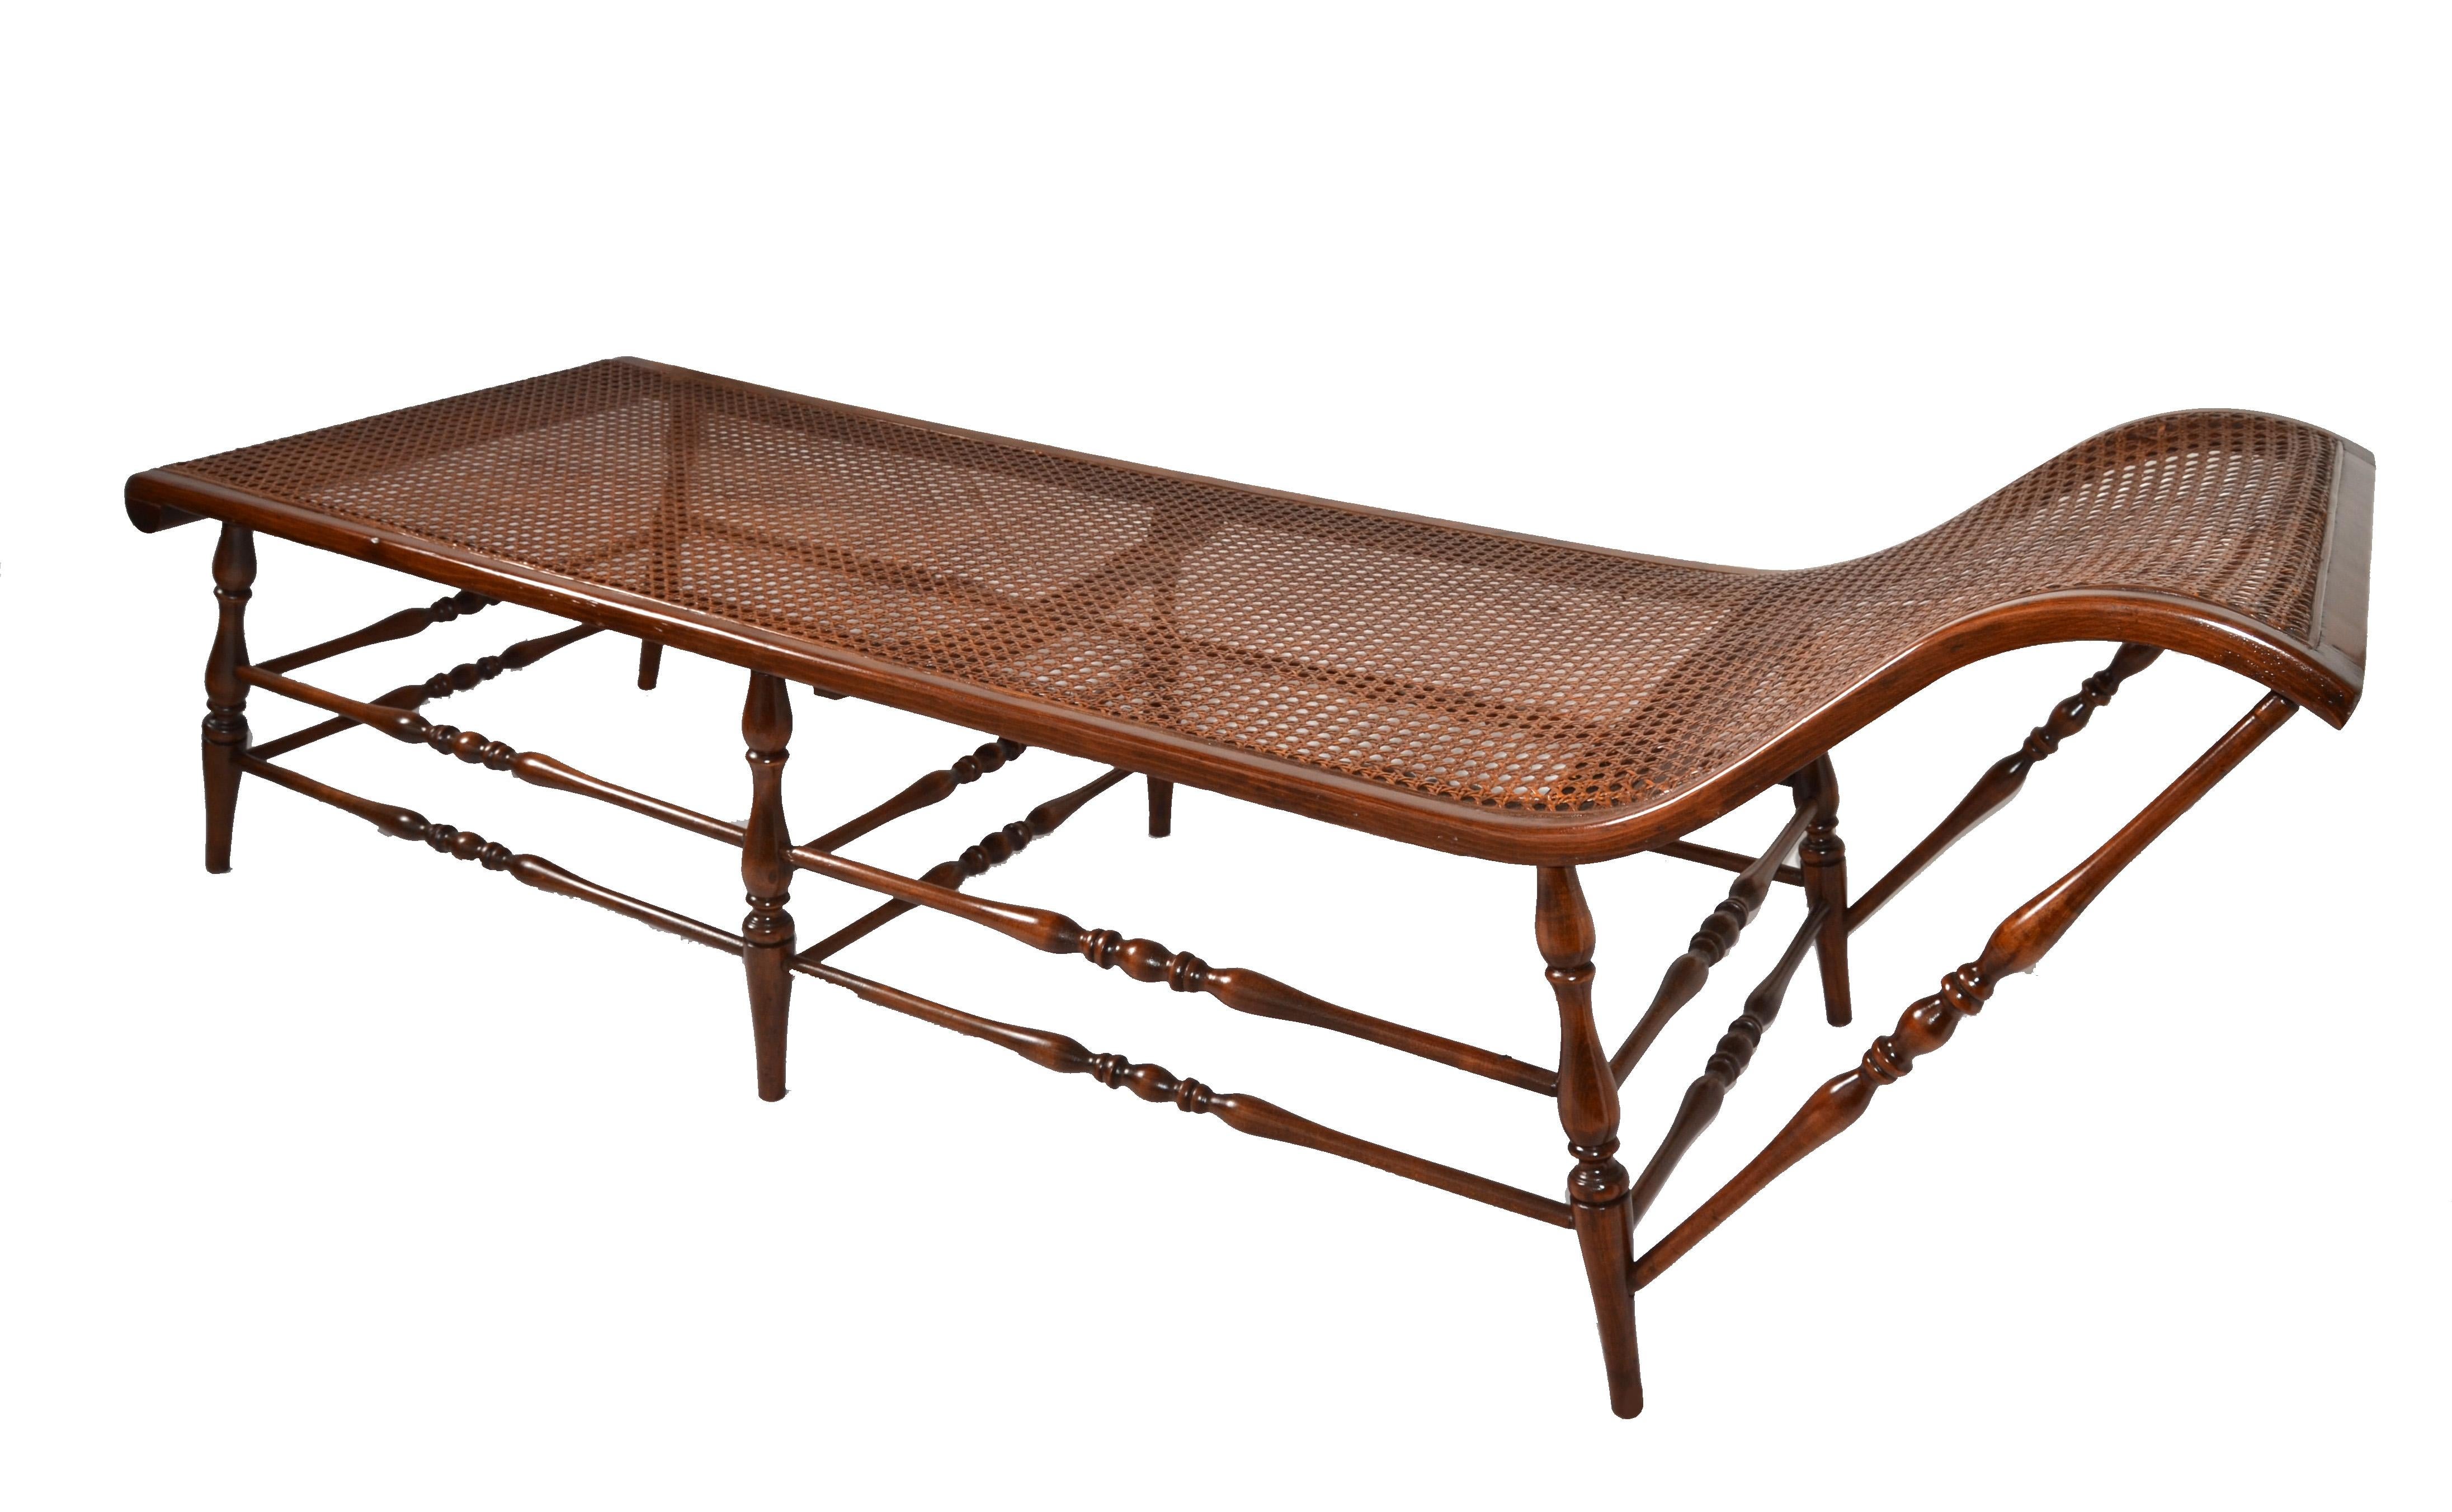 British Colonial Handwoven Cane Turned Wood Spindle Frame Chaise Lounge Daybed For Sale 2